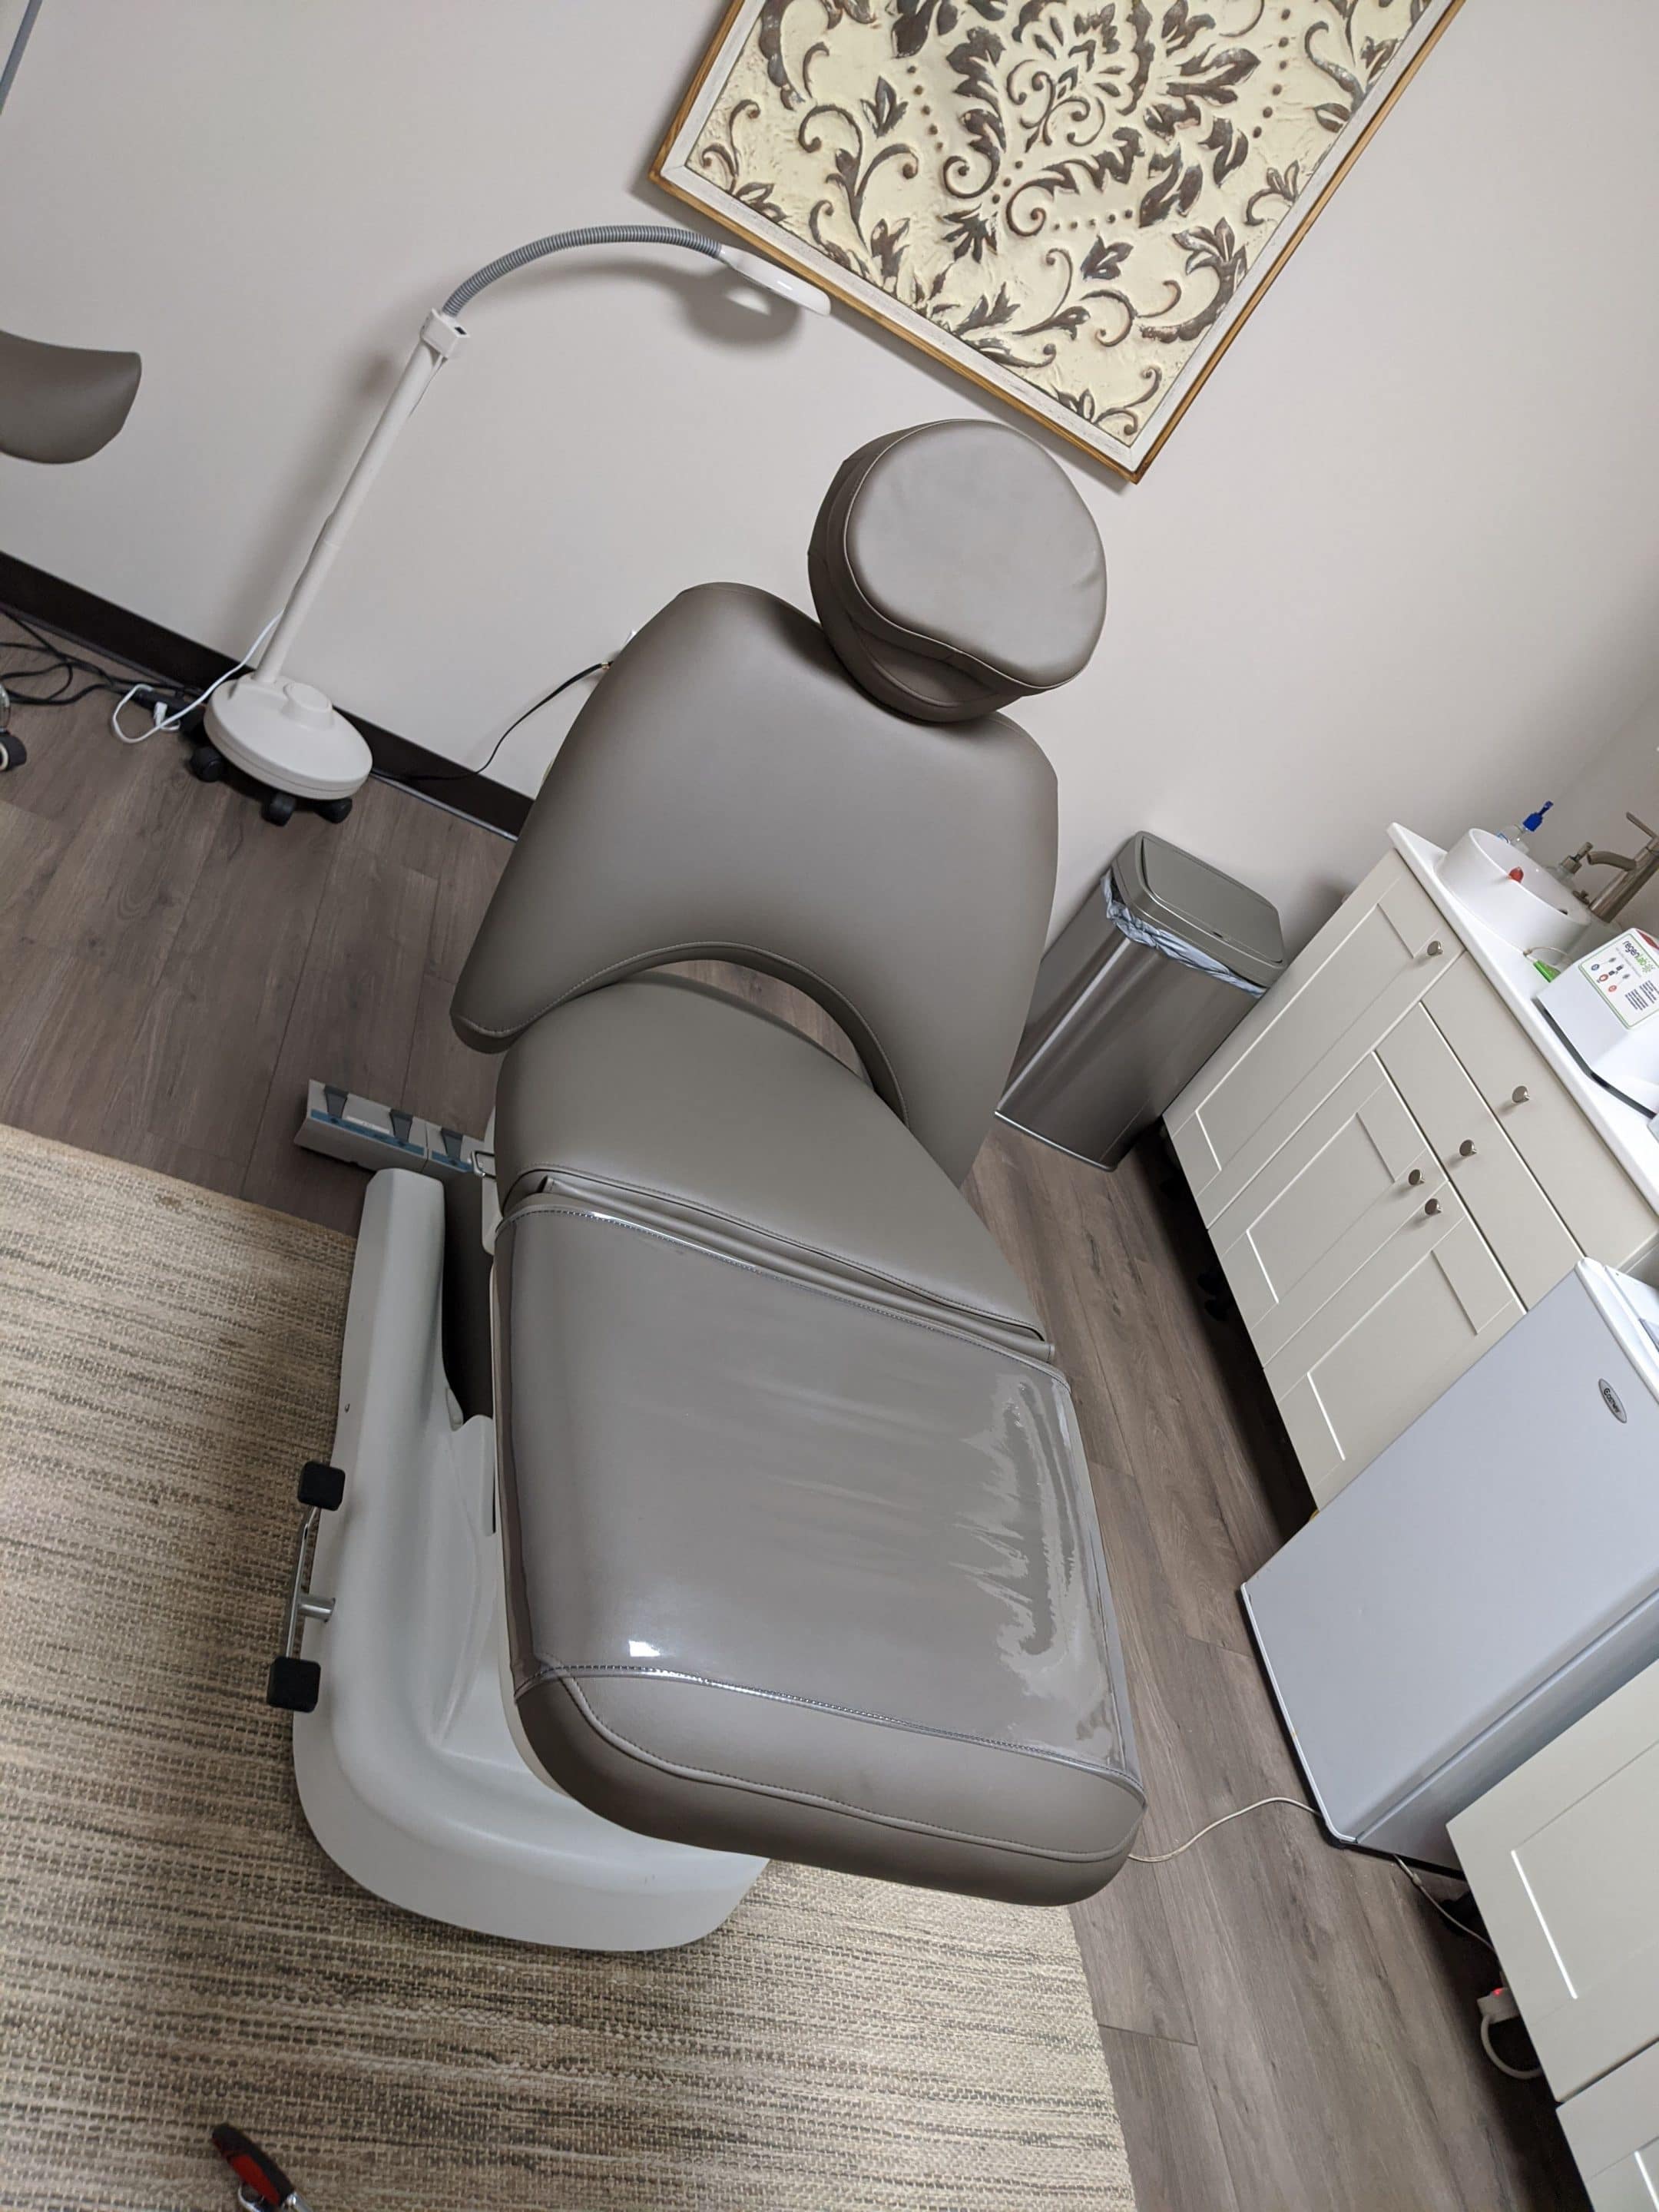 Exam Table Upholstery Gunmetal Durable Olympus Onsite Service Healthcare Upholstery